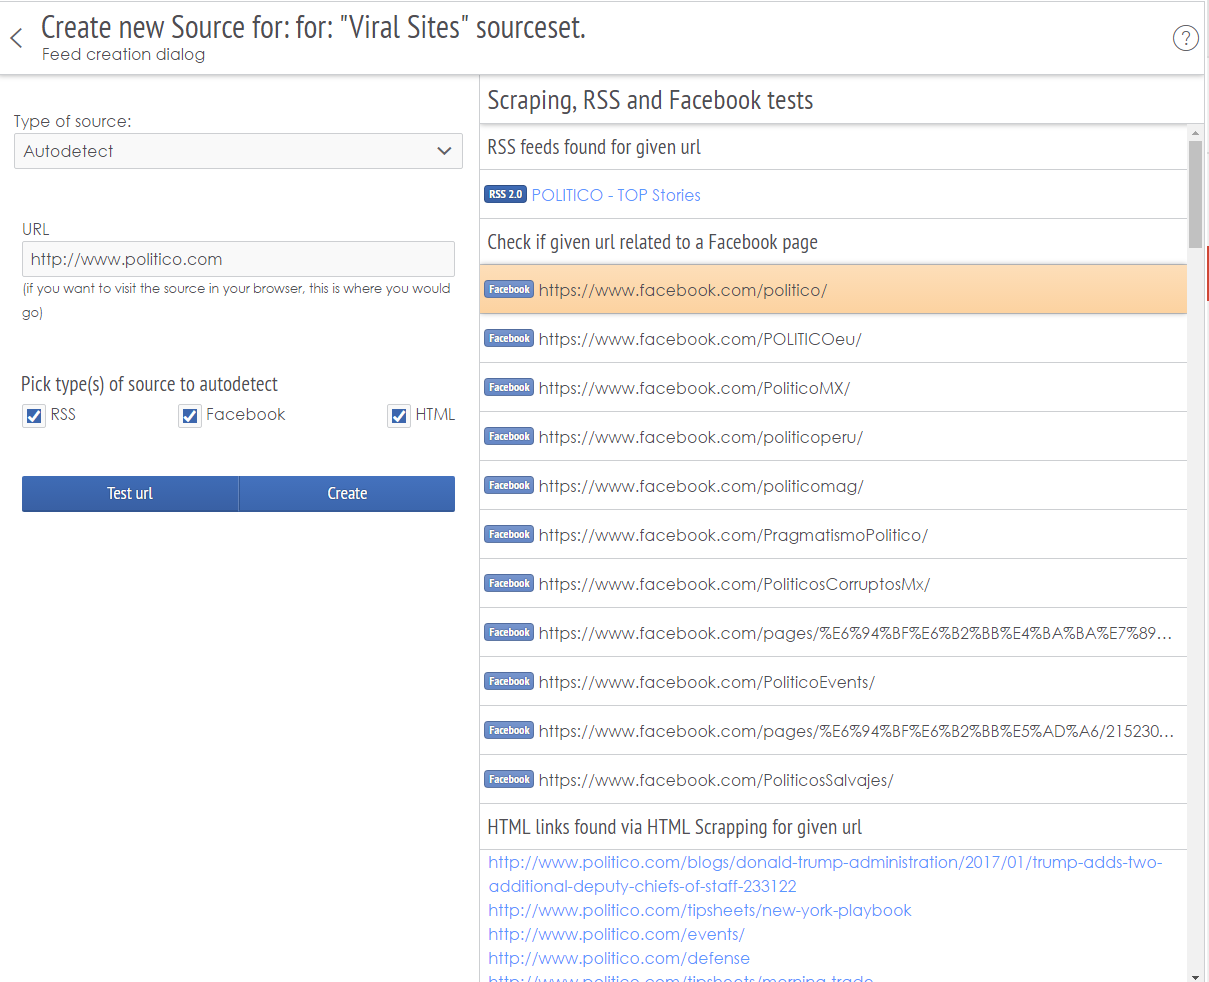 Add custom sources to be tracked. RSS feeds, Facebook pages, subreddits, HTML scraping, Twitter...